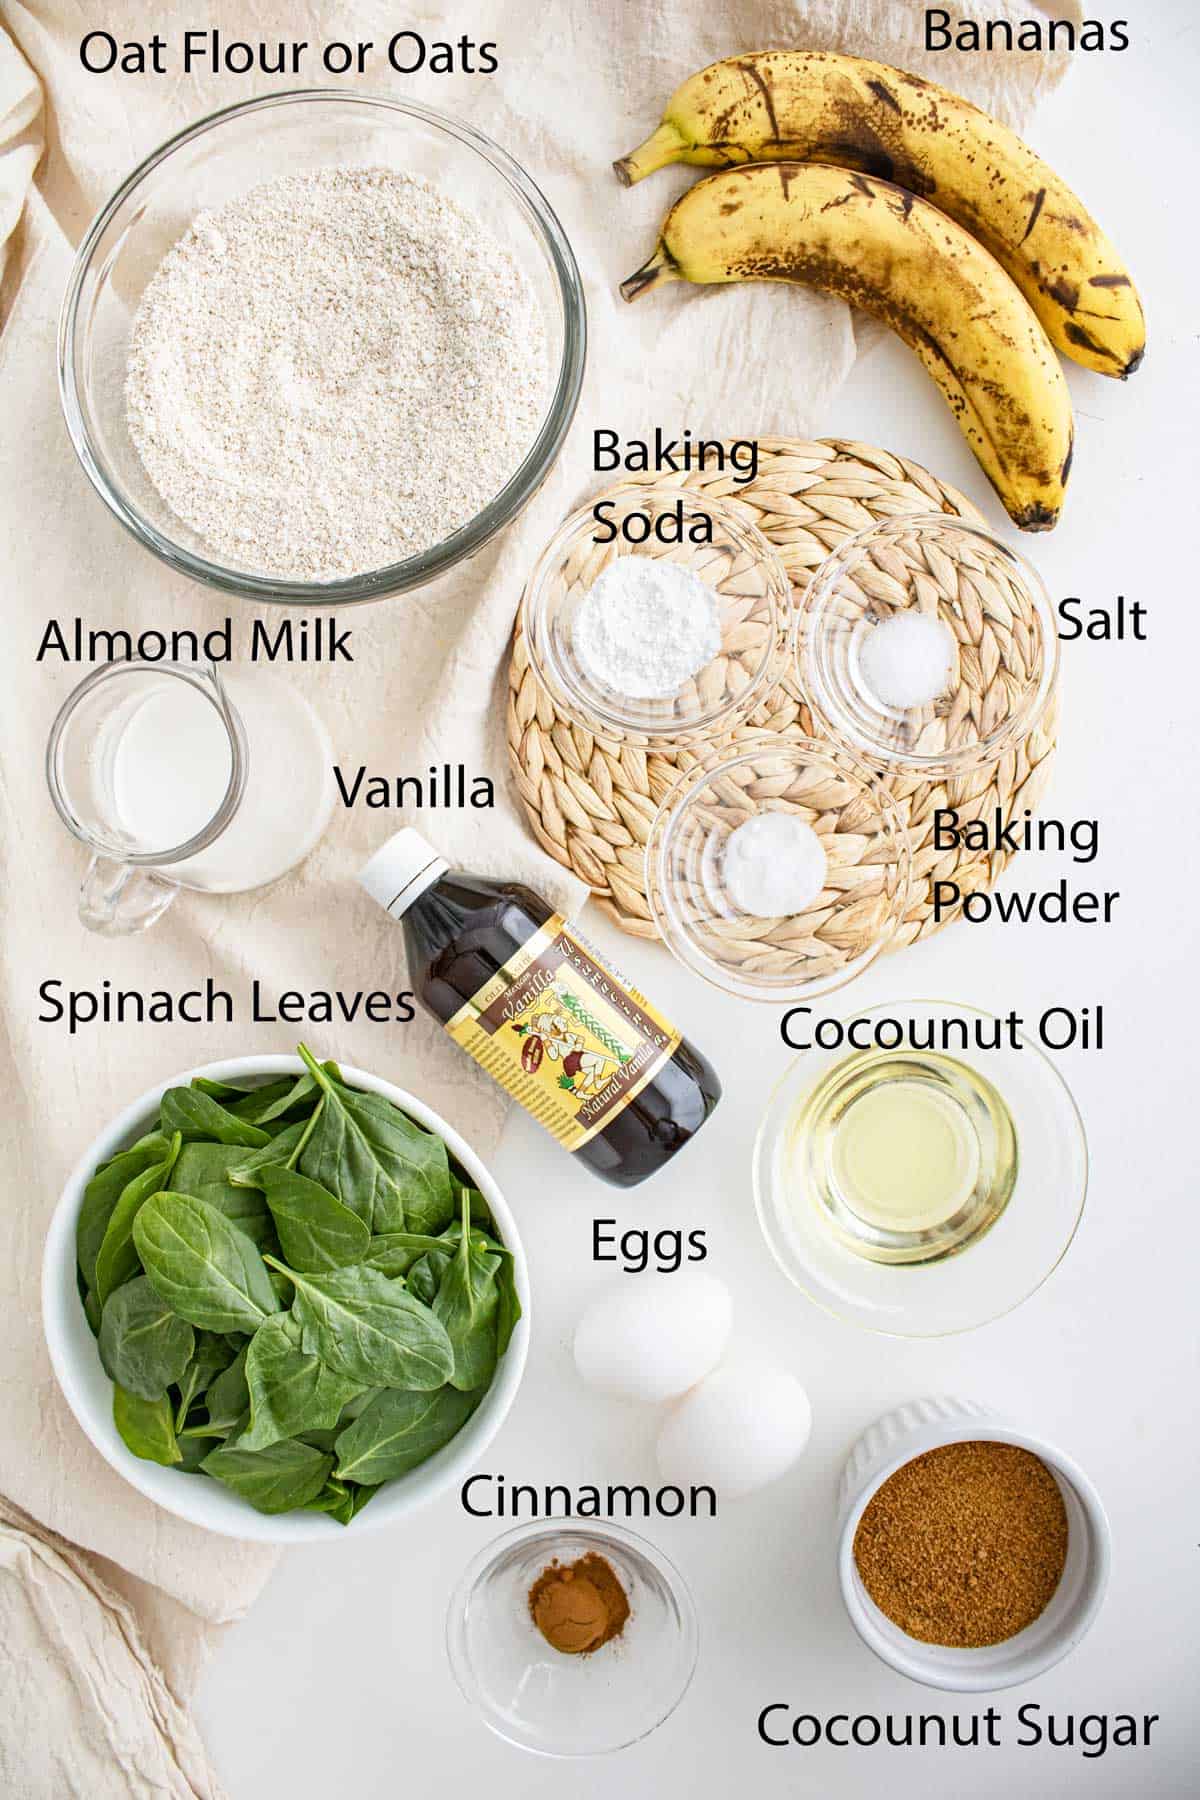 Ingredients laid out with labels for banana and spinach muffins.